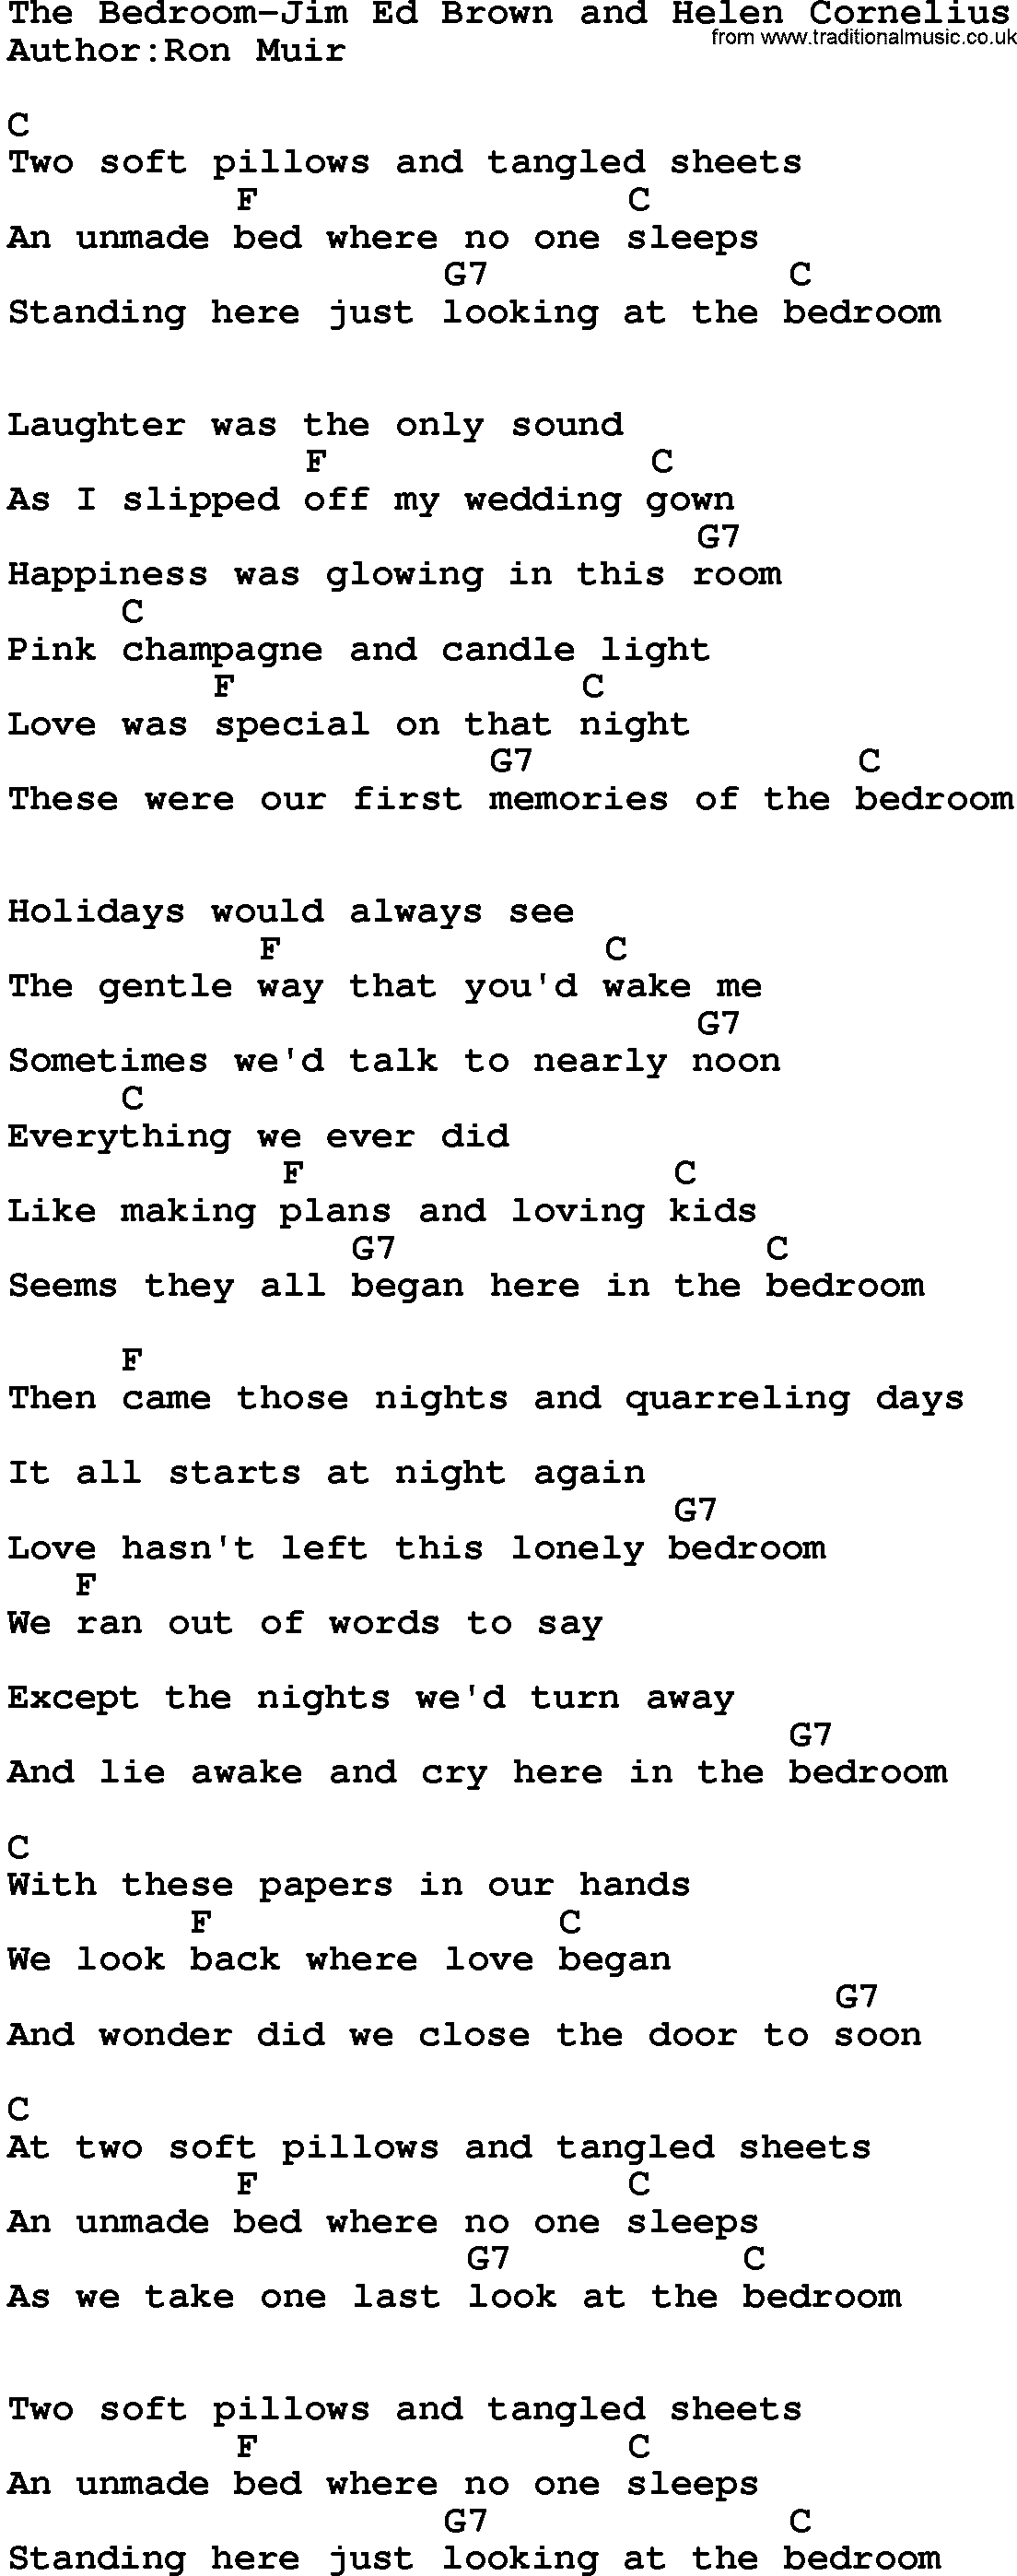 Country music song: The Bedroom-Jim Ed Brown And Helen Cornelius lyrics and chords